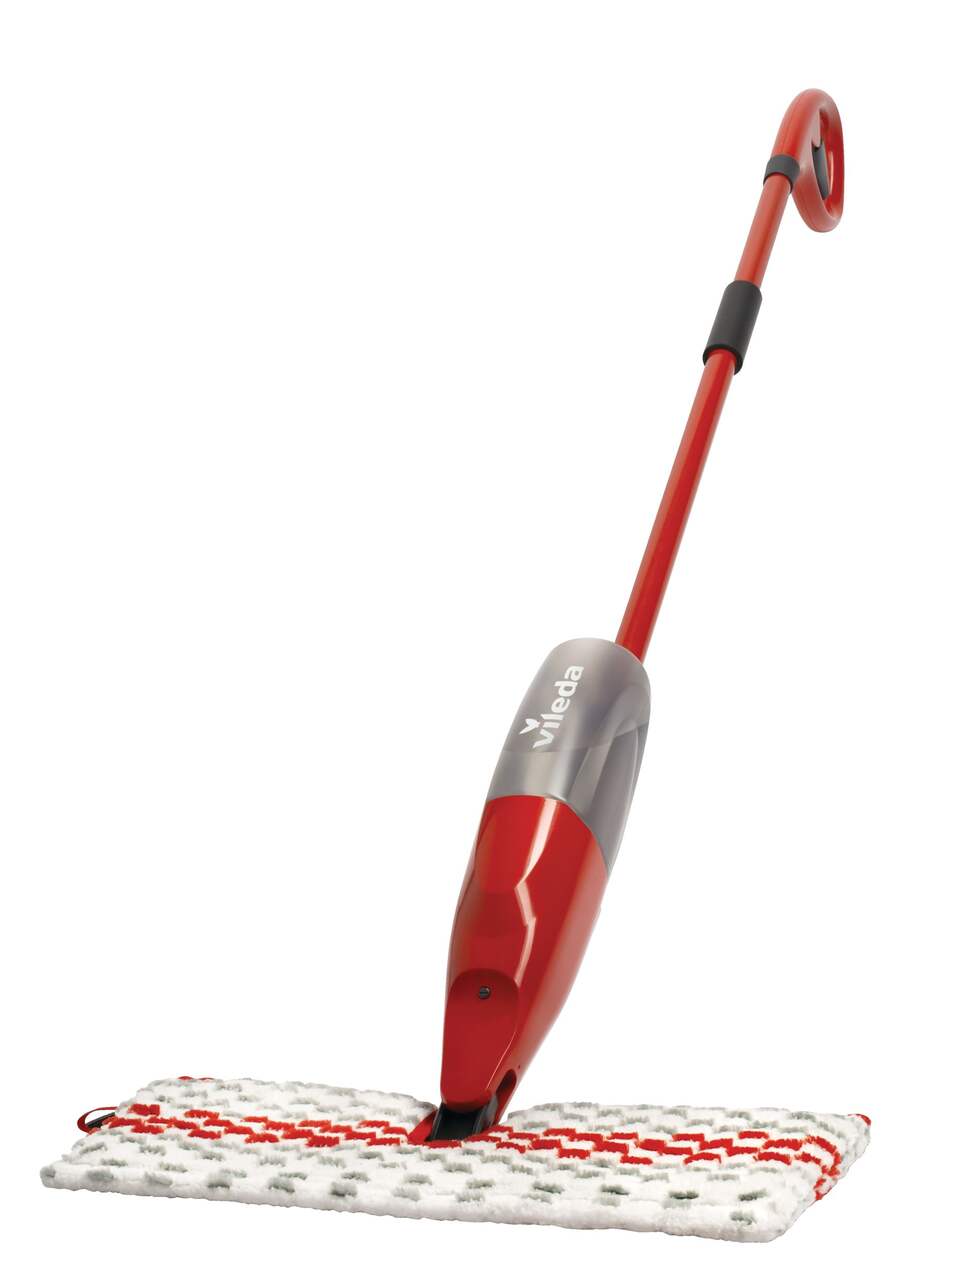 https://media-www.canadiantire.ca/product/living/cleaning/household-cleaning-tools/1424620/vileda-promist-max-mop-a235ffe0-57be-459e-9f39-bf3aca9f65a6-jpgrendition.jpg?imdensity=1&imwidth=640&impolicy=mZoom